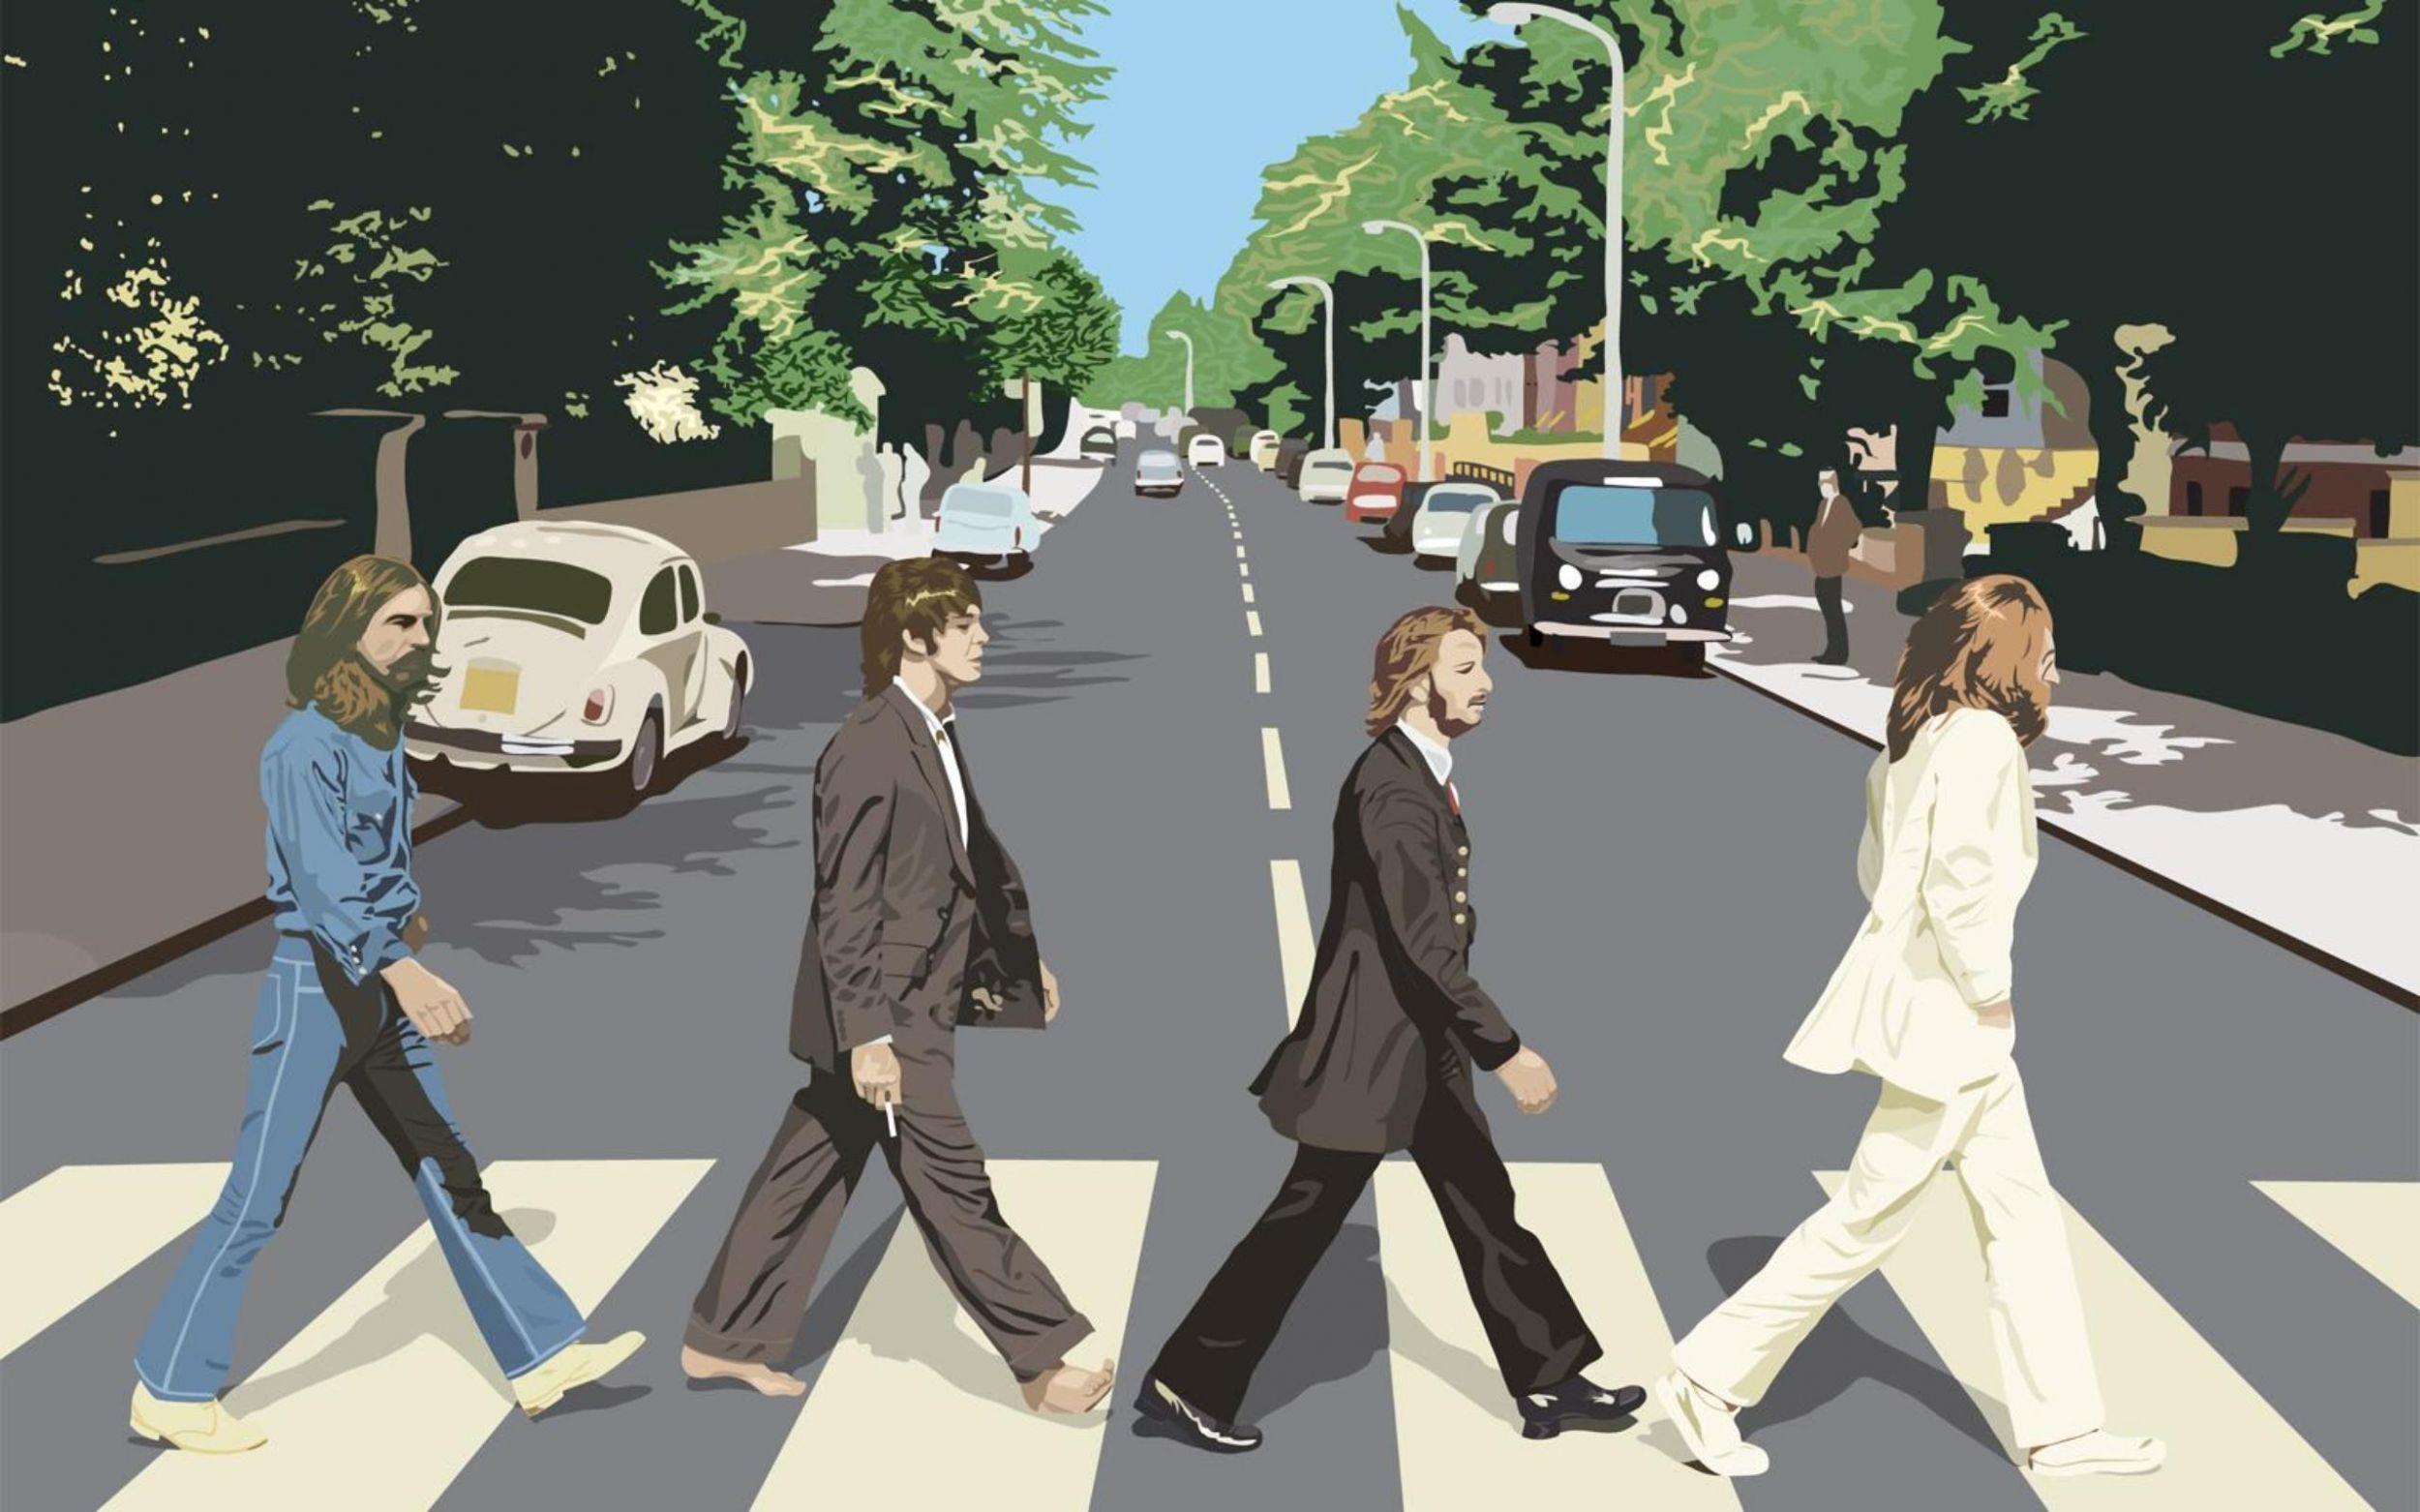 Beatles HD Wallpaper and Picture